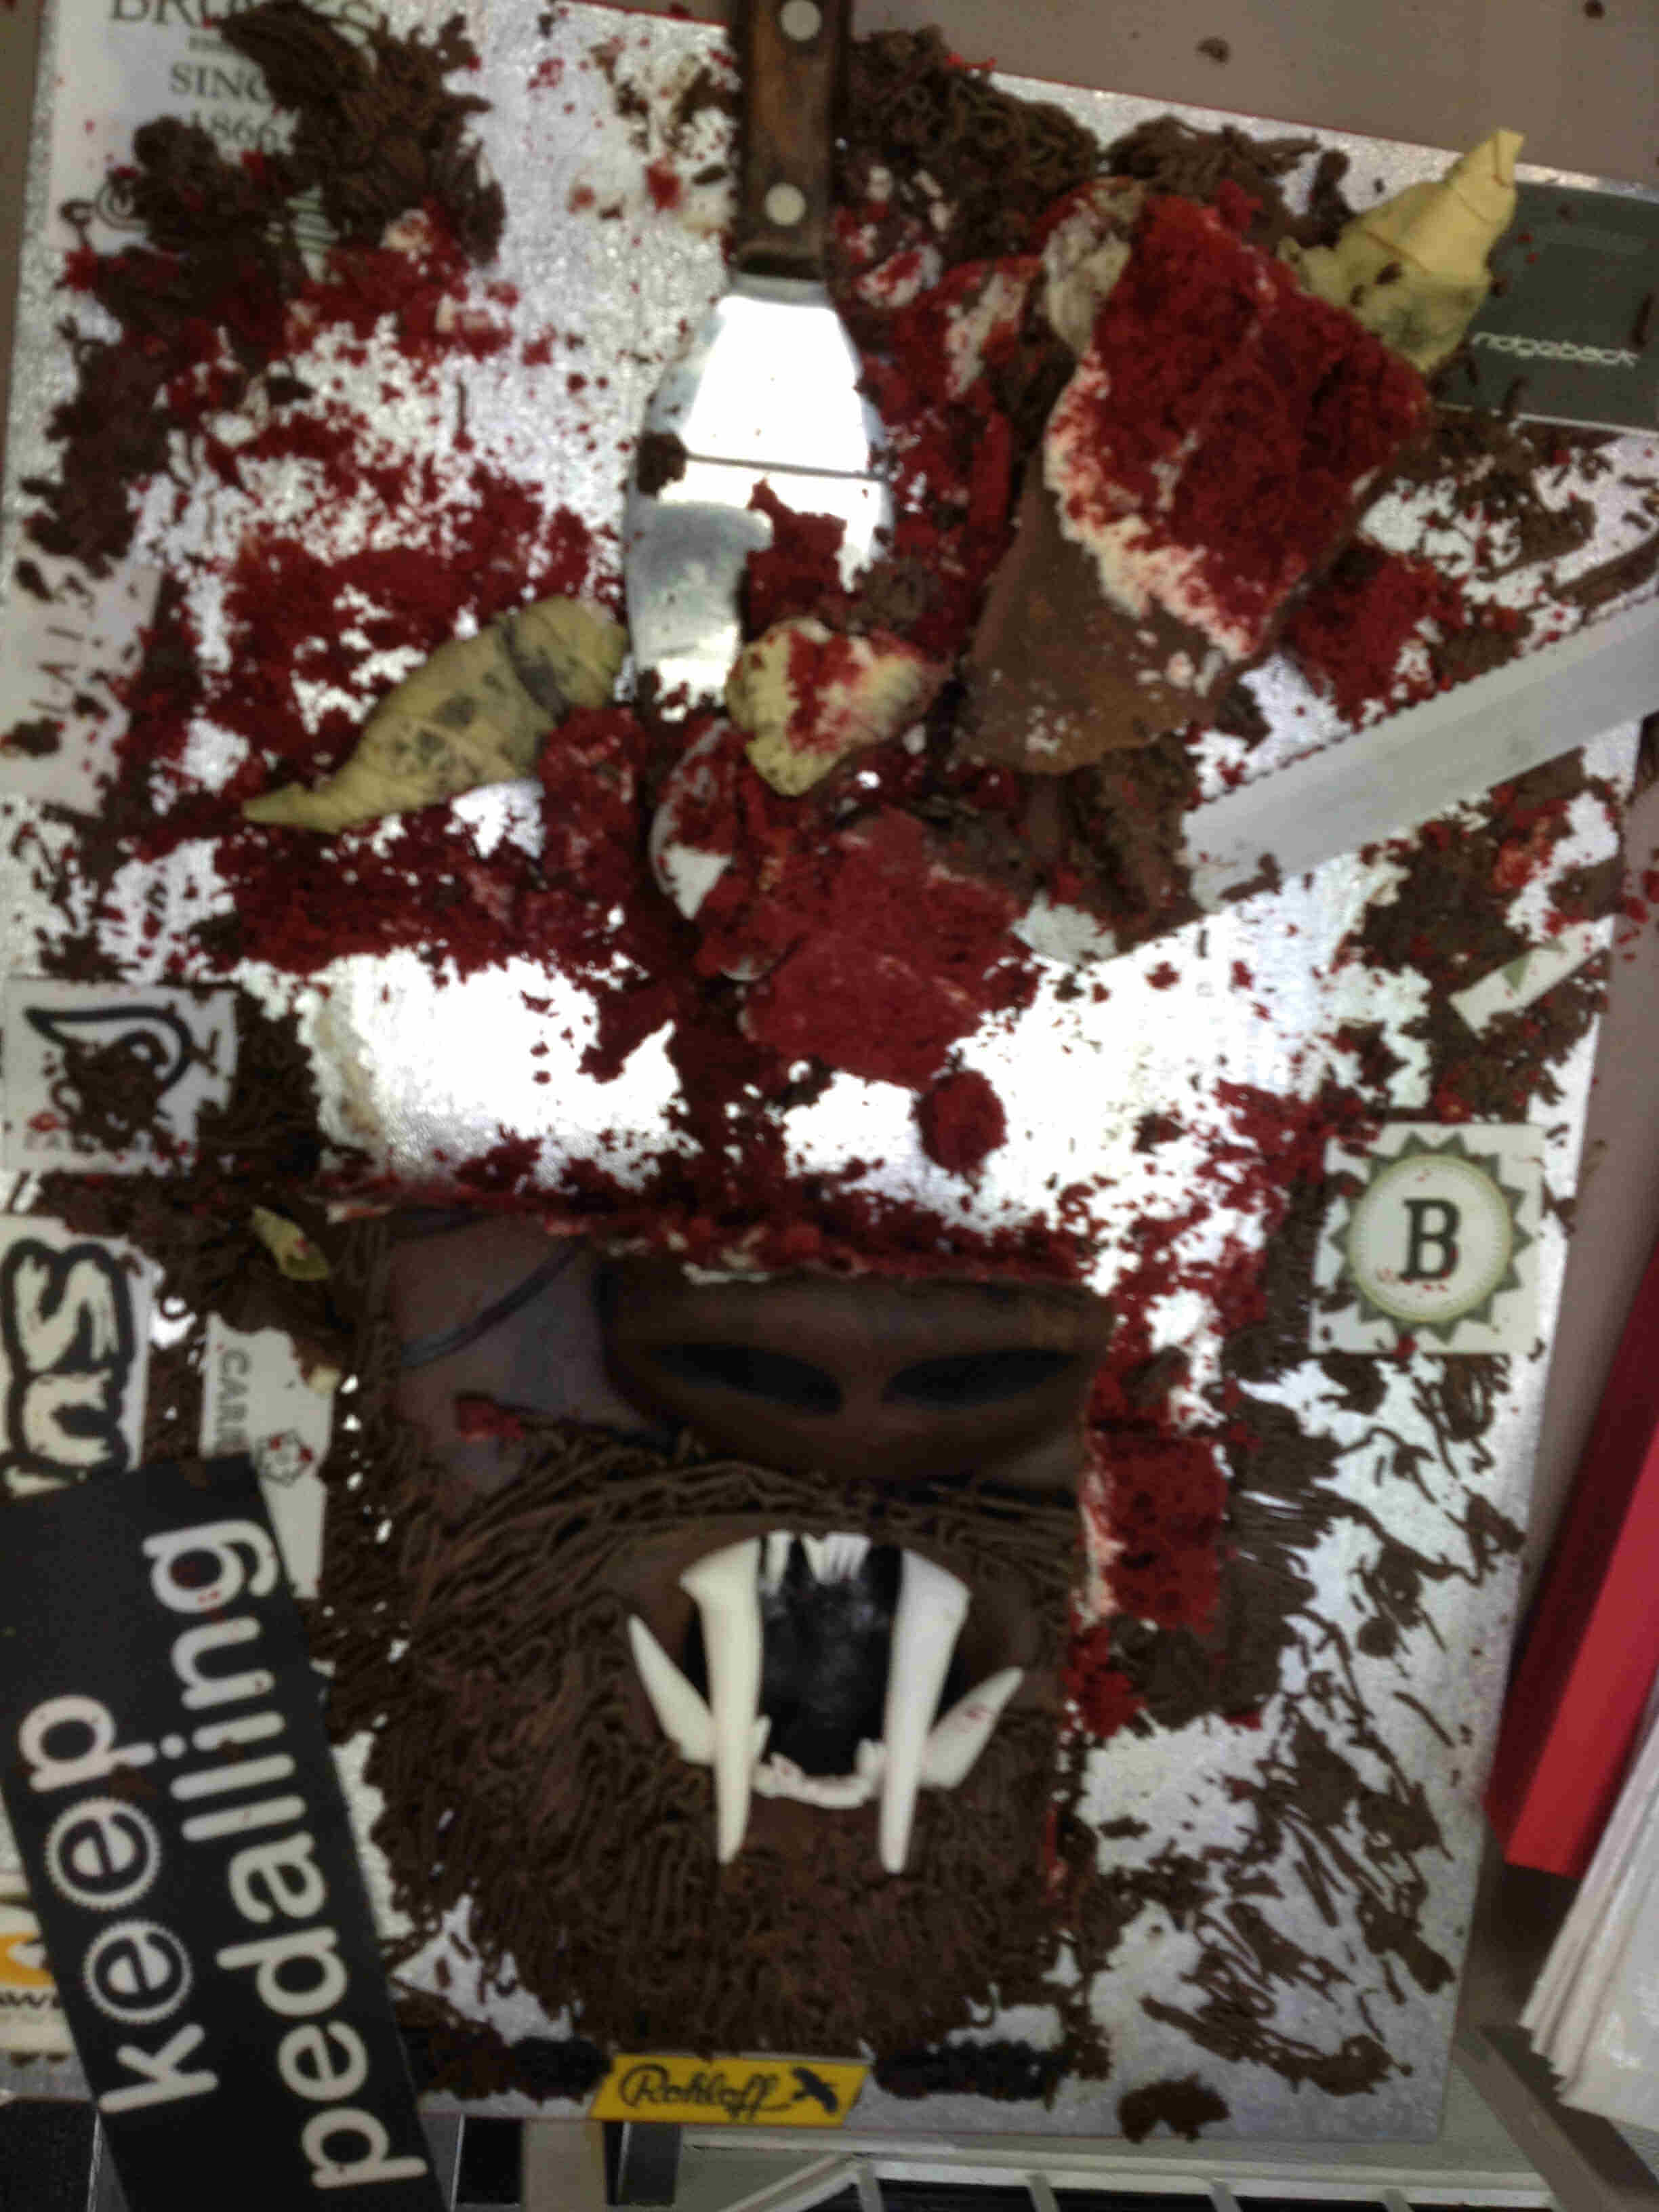 Downward view of a half eaten cake, that was made to look like a Krampus monster